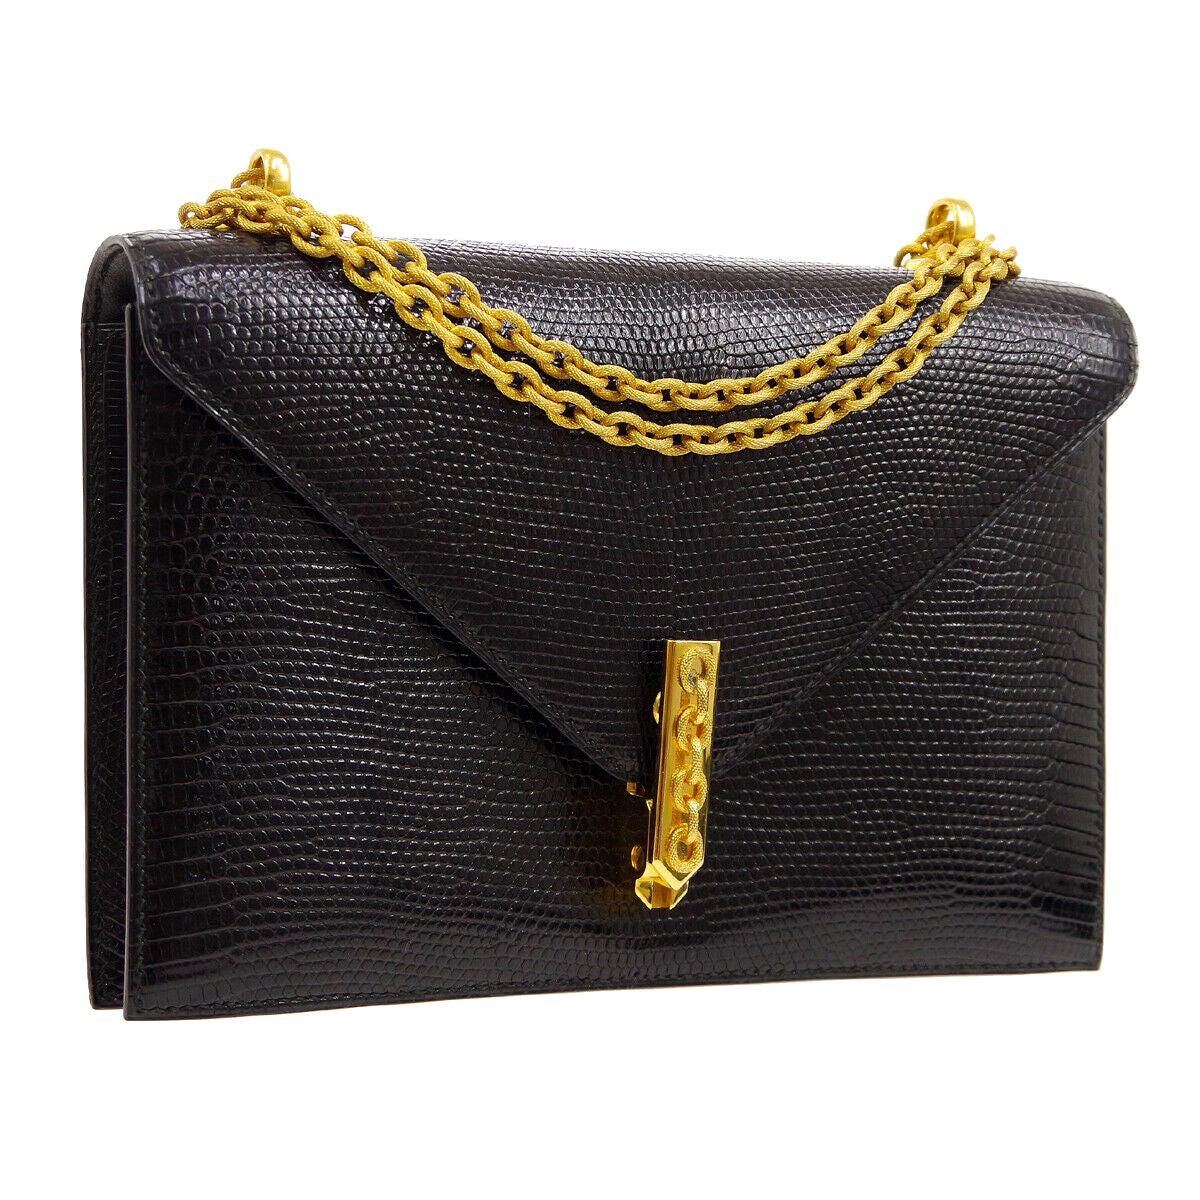 Hermes Black Lizard Exotic Leather Gold Small Evening Shoulder Flap Bag in Box 